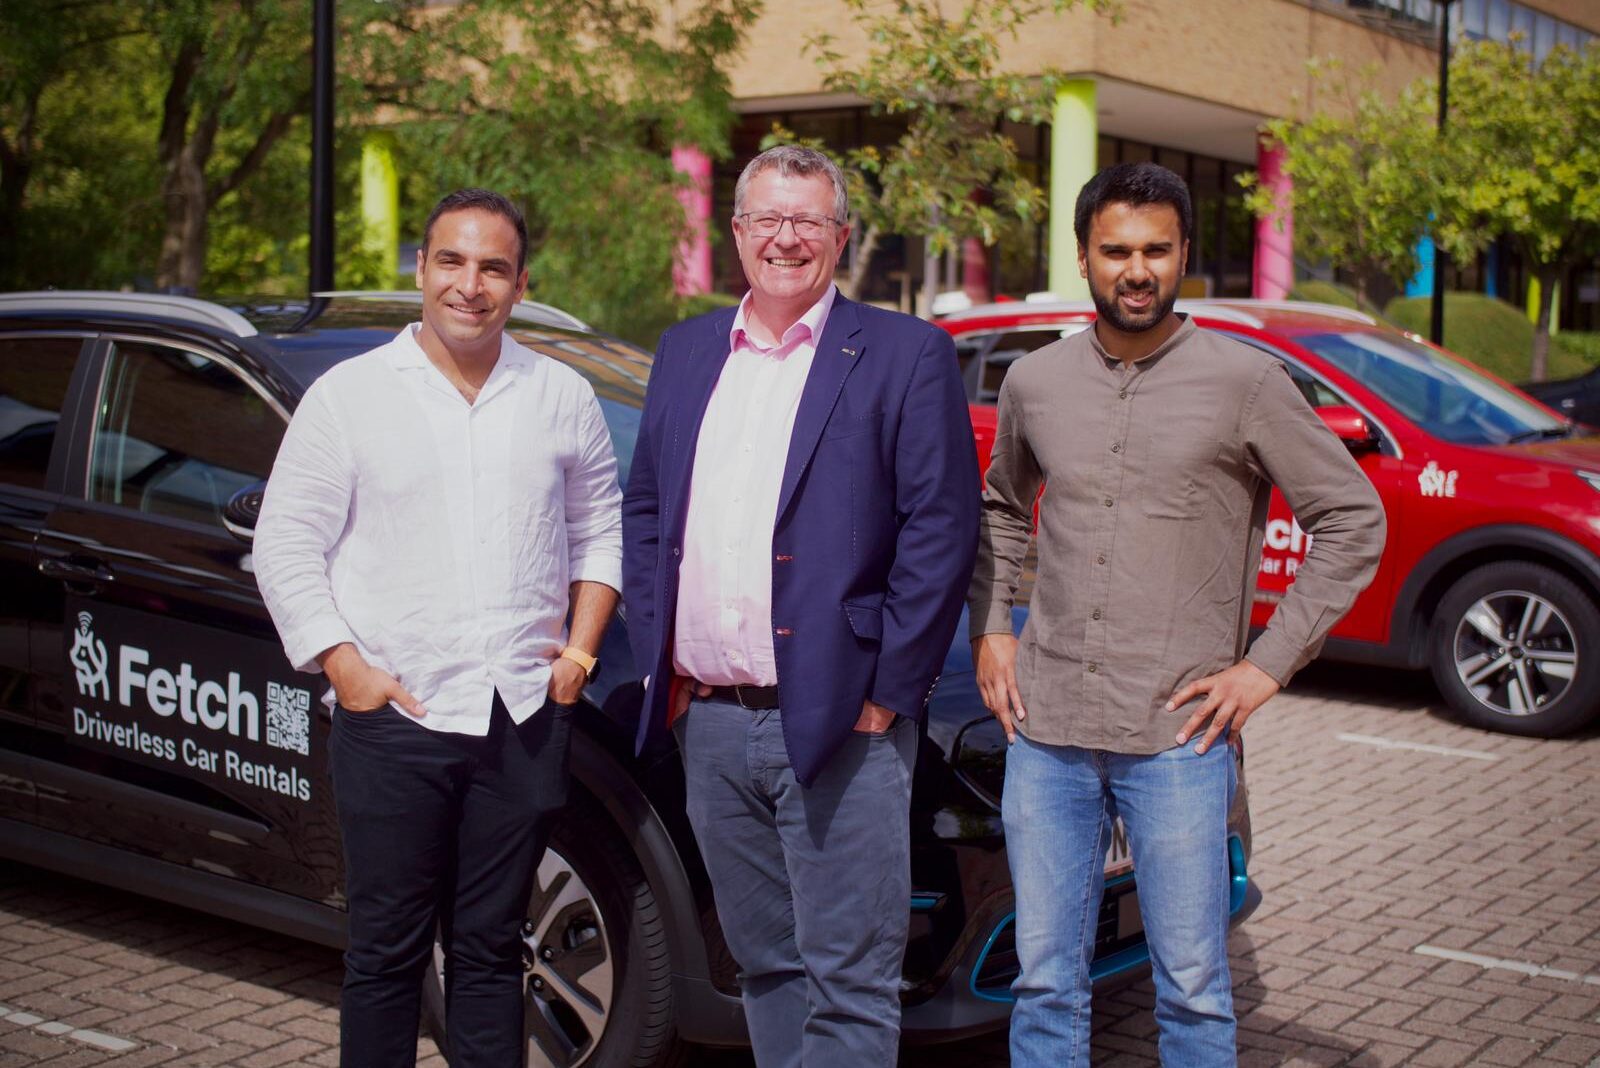 Vodafone UK Business Director Nick Gliddon (centre) with the Imperium Drive team in Milton Keynes